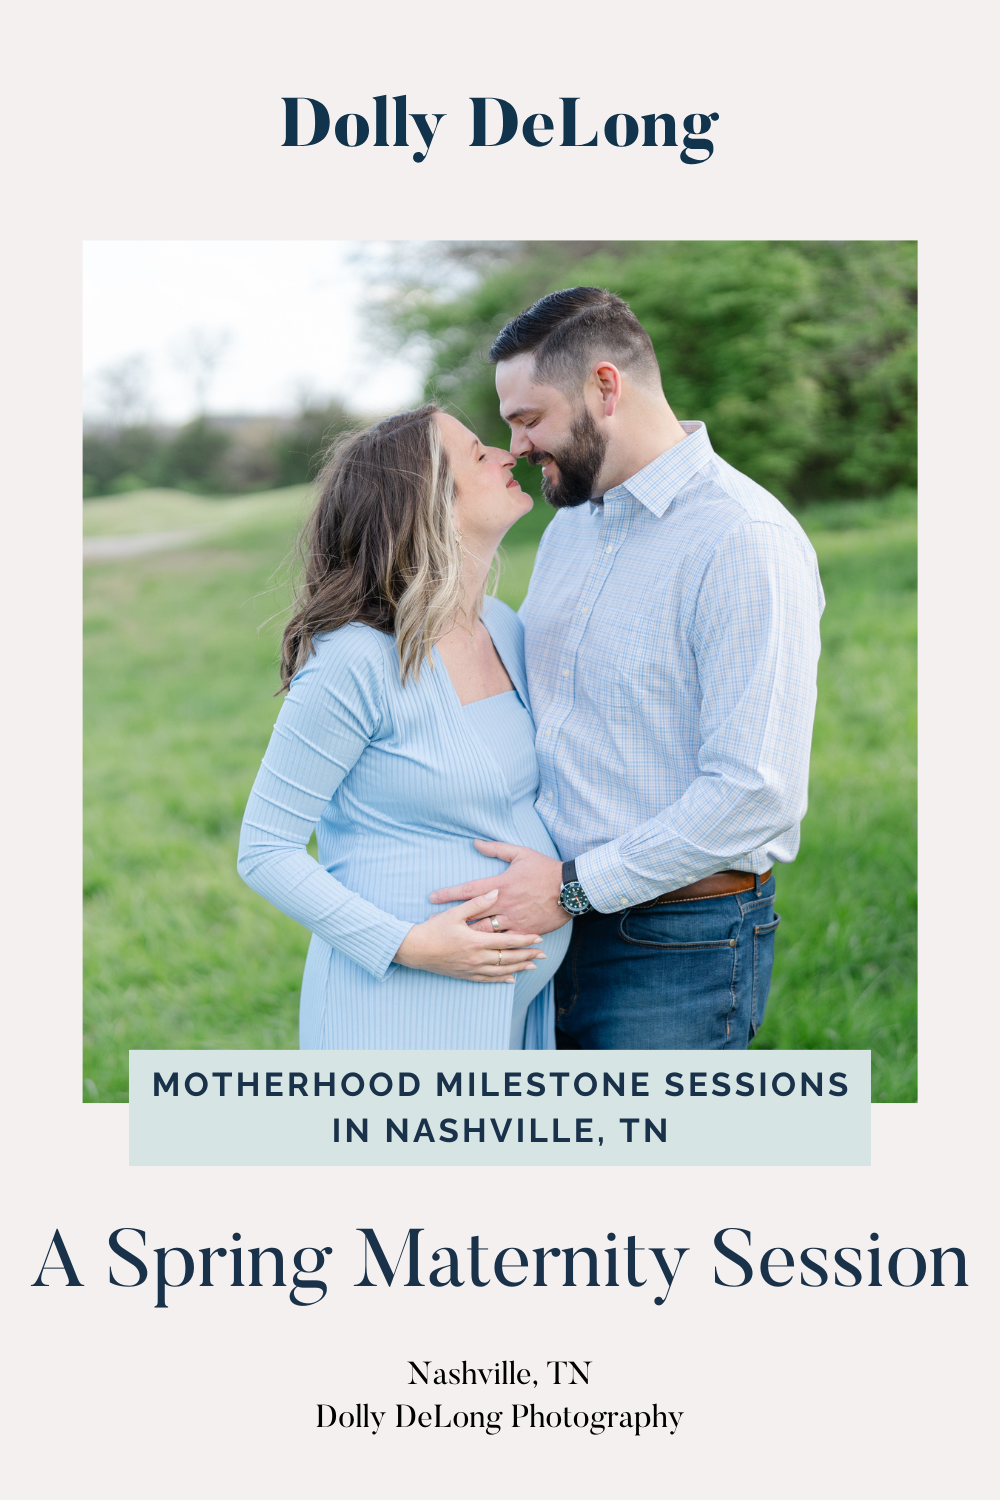 a-pinterest-pin-image-with-text-describing-a-nashville-spring-maternity-session-by-dolly-delong-photography